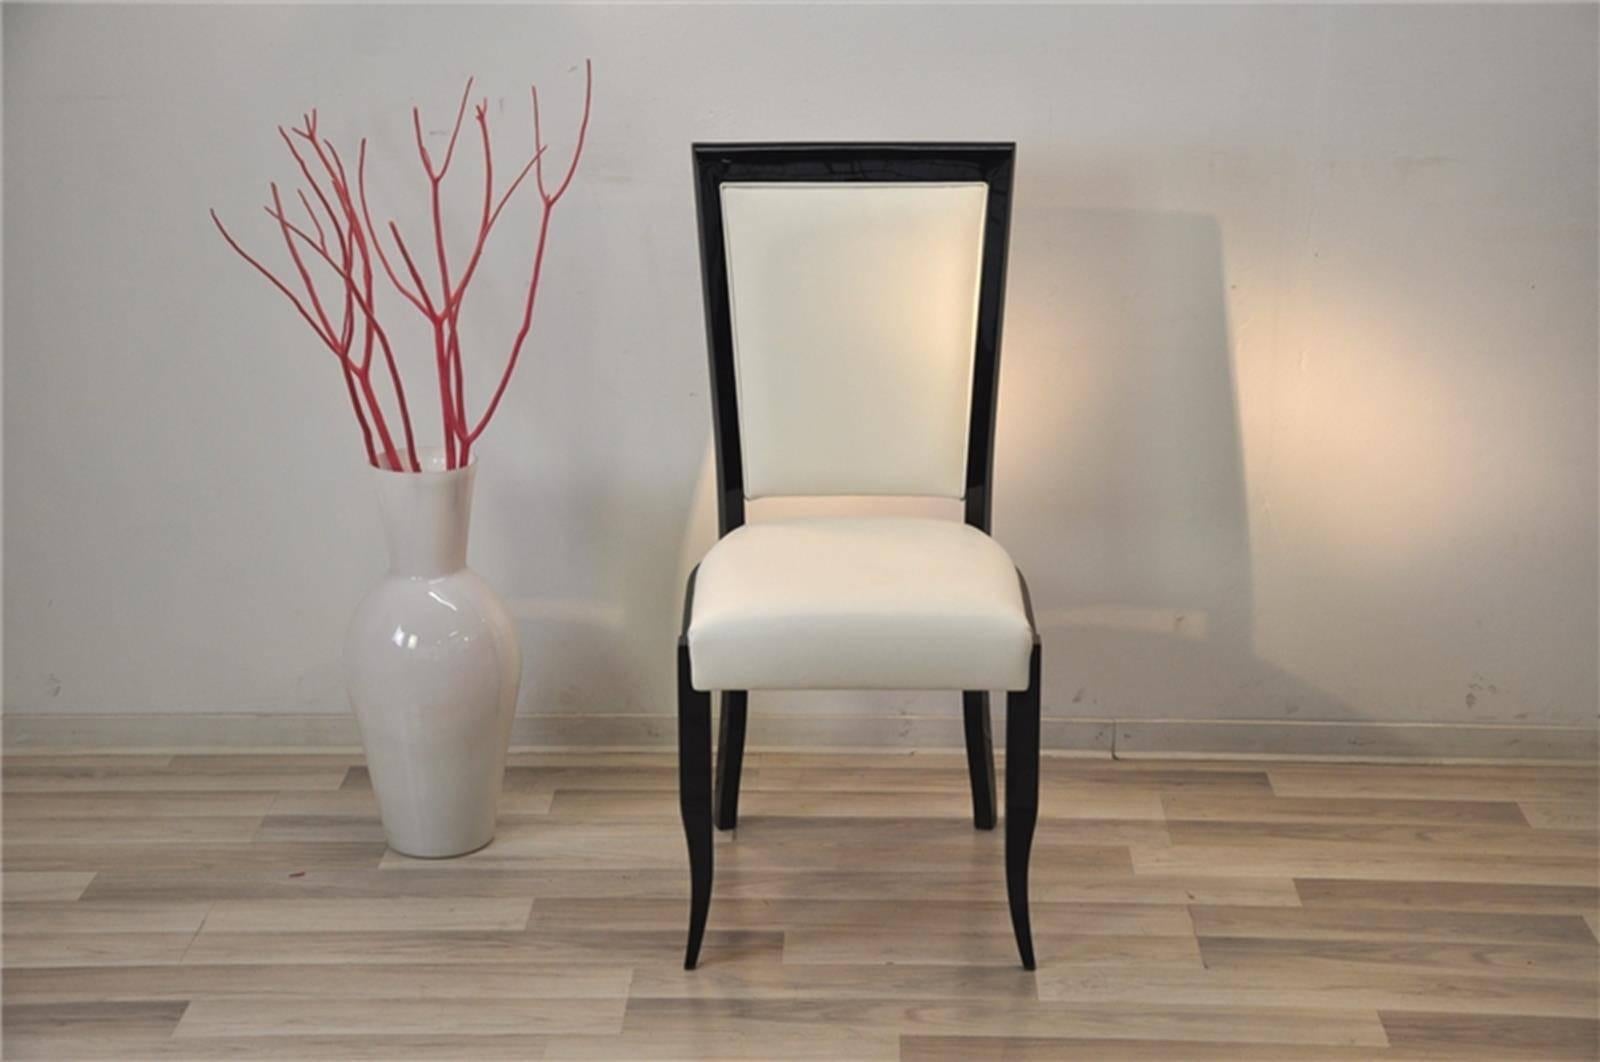 Hand-Crafted Art Deco Style Chairs